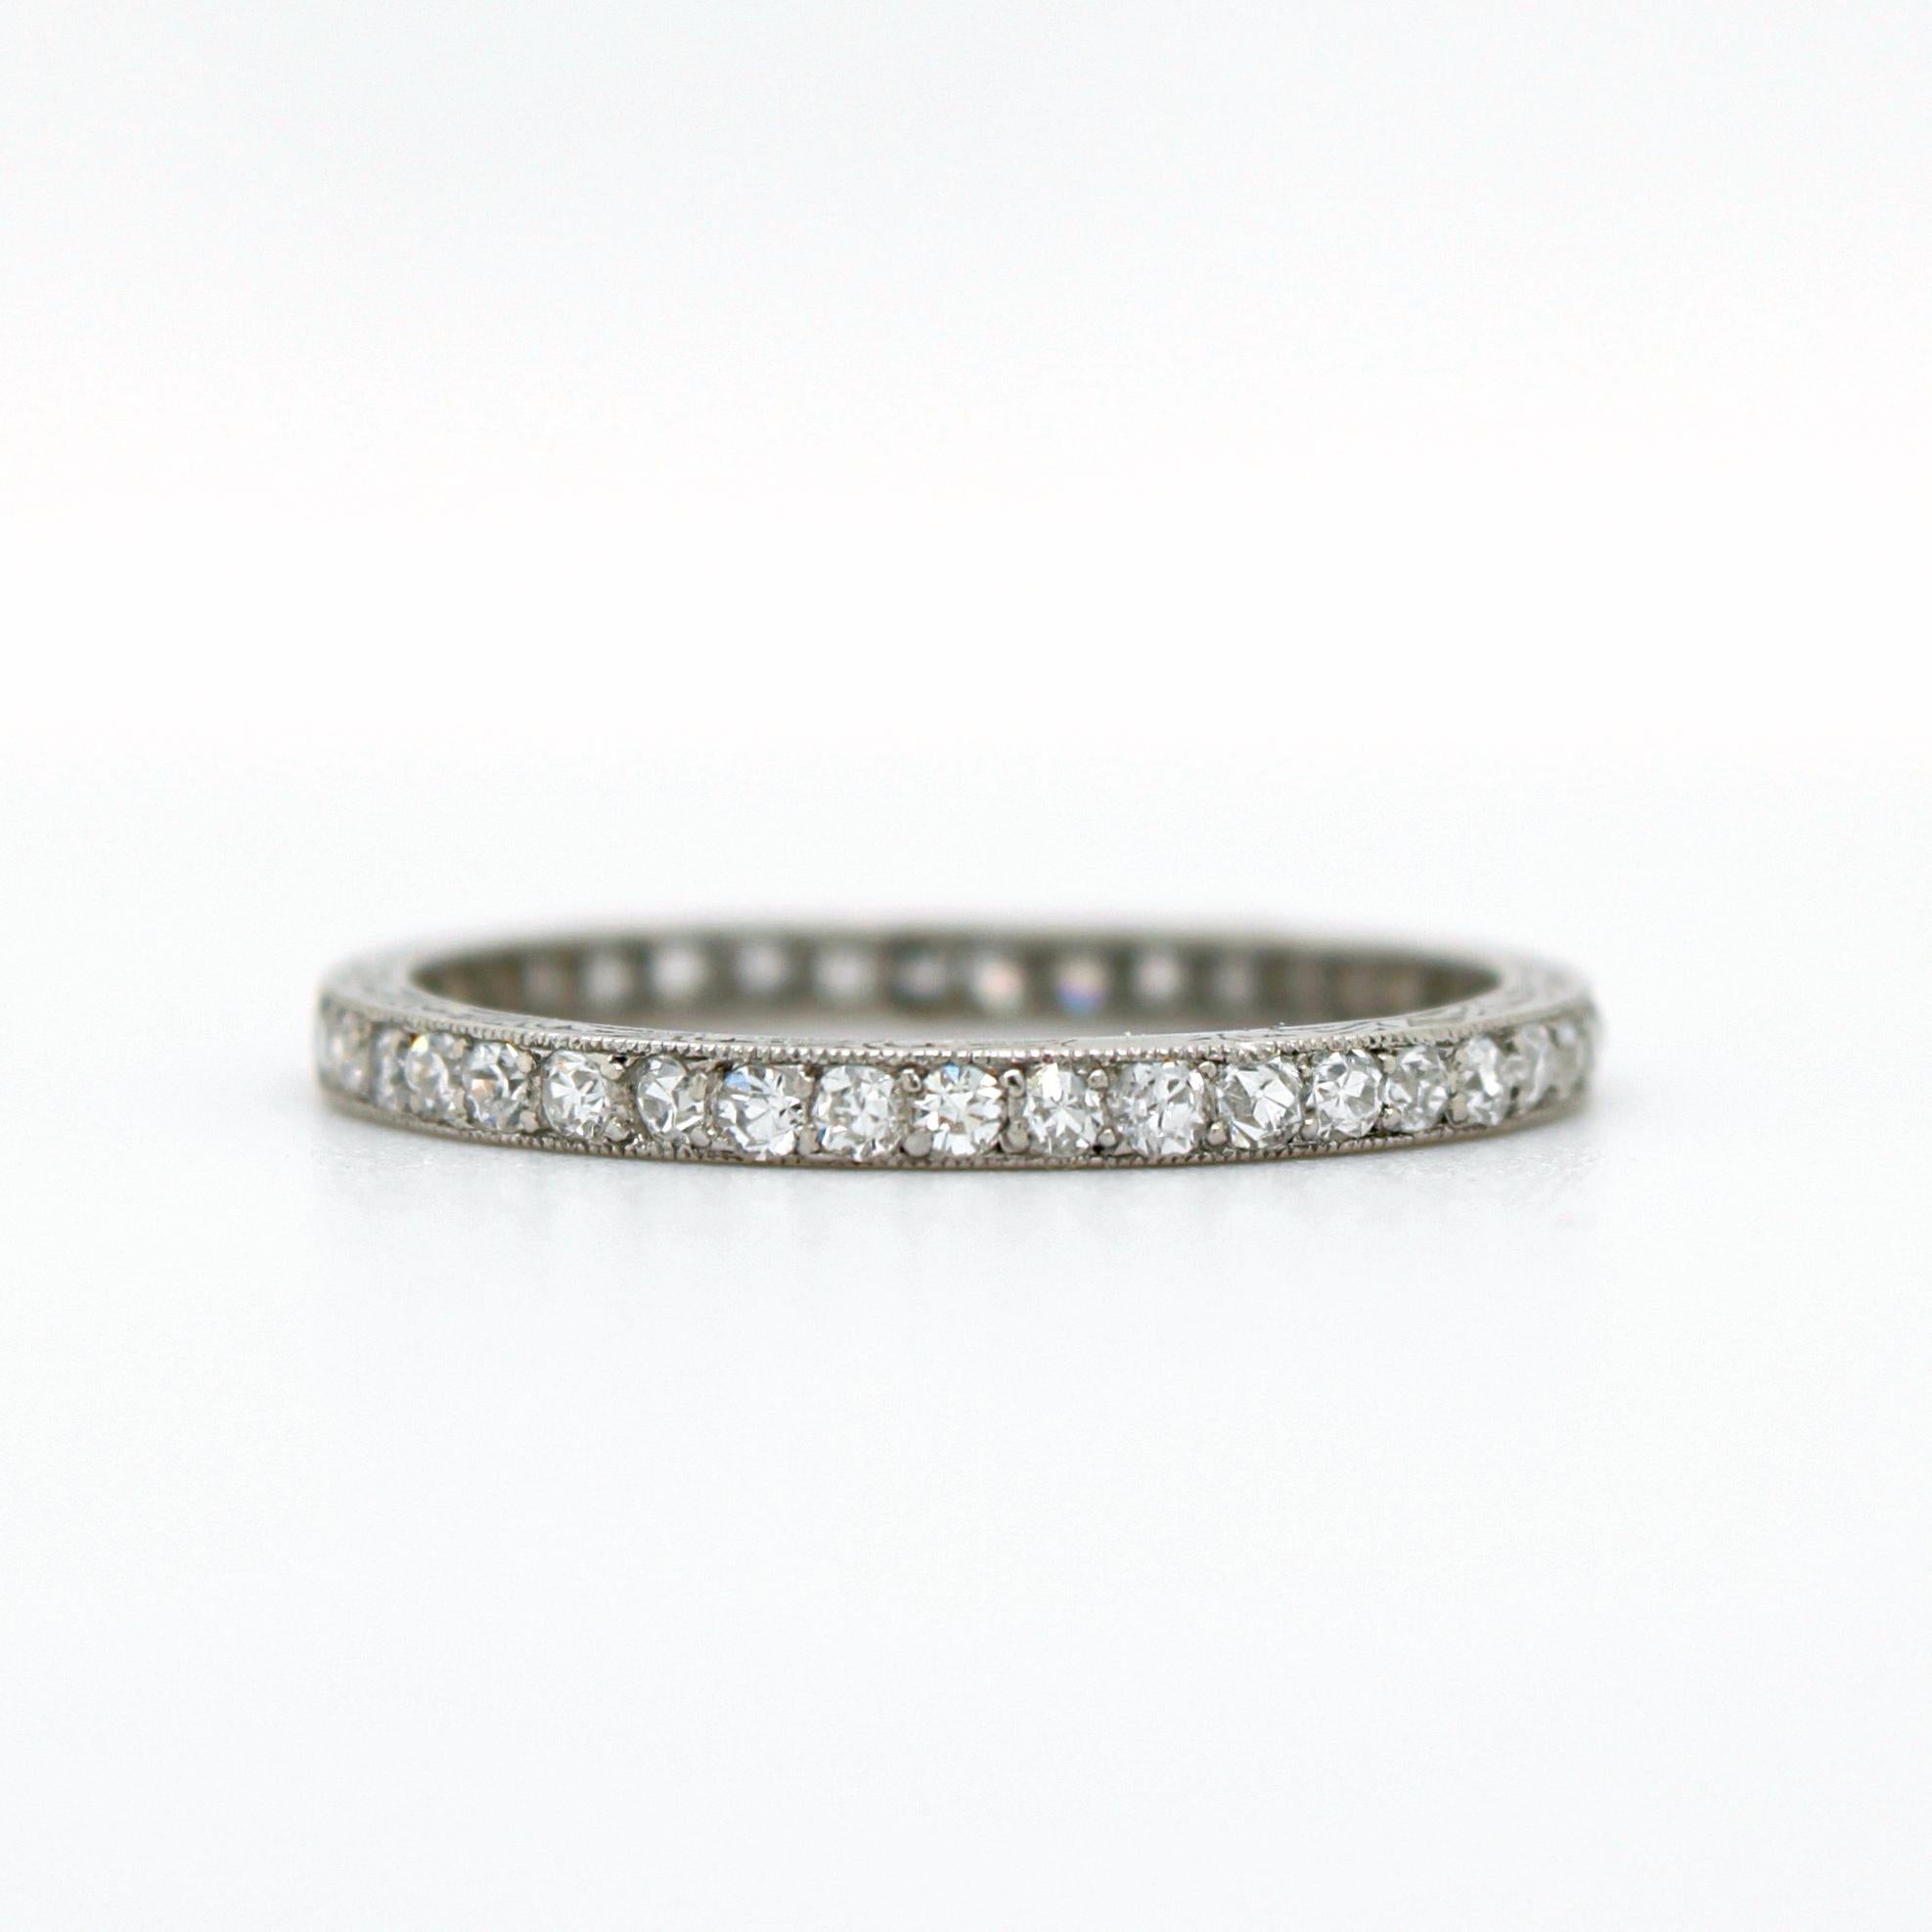 A lovely diamond eternity wedding band ring by Lacloche Frères - Paris, France, ca. 1910s. 
The ring has a lot of character. It is very finely set with small old cut diamonds throughout and the ring profile has an intricate carved design, both of